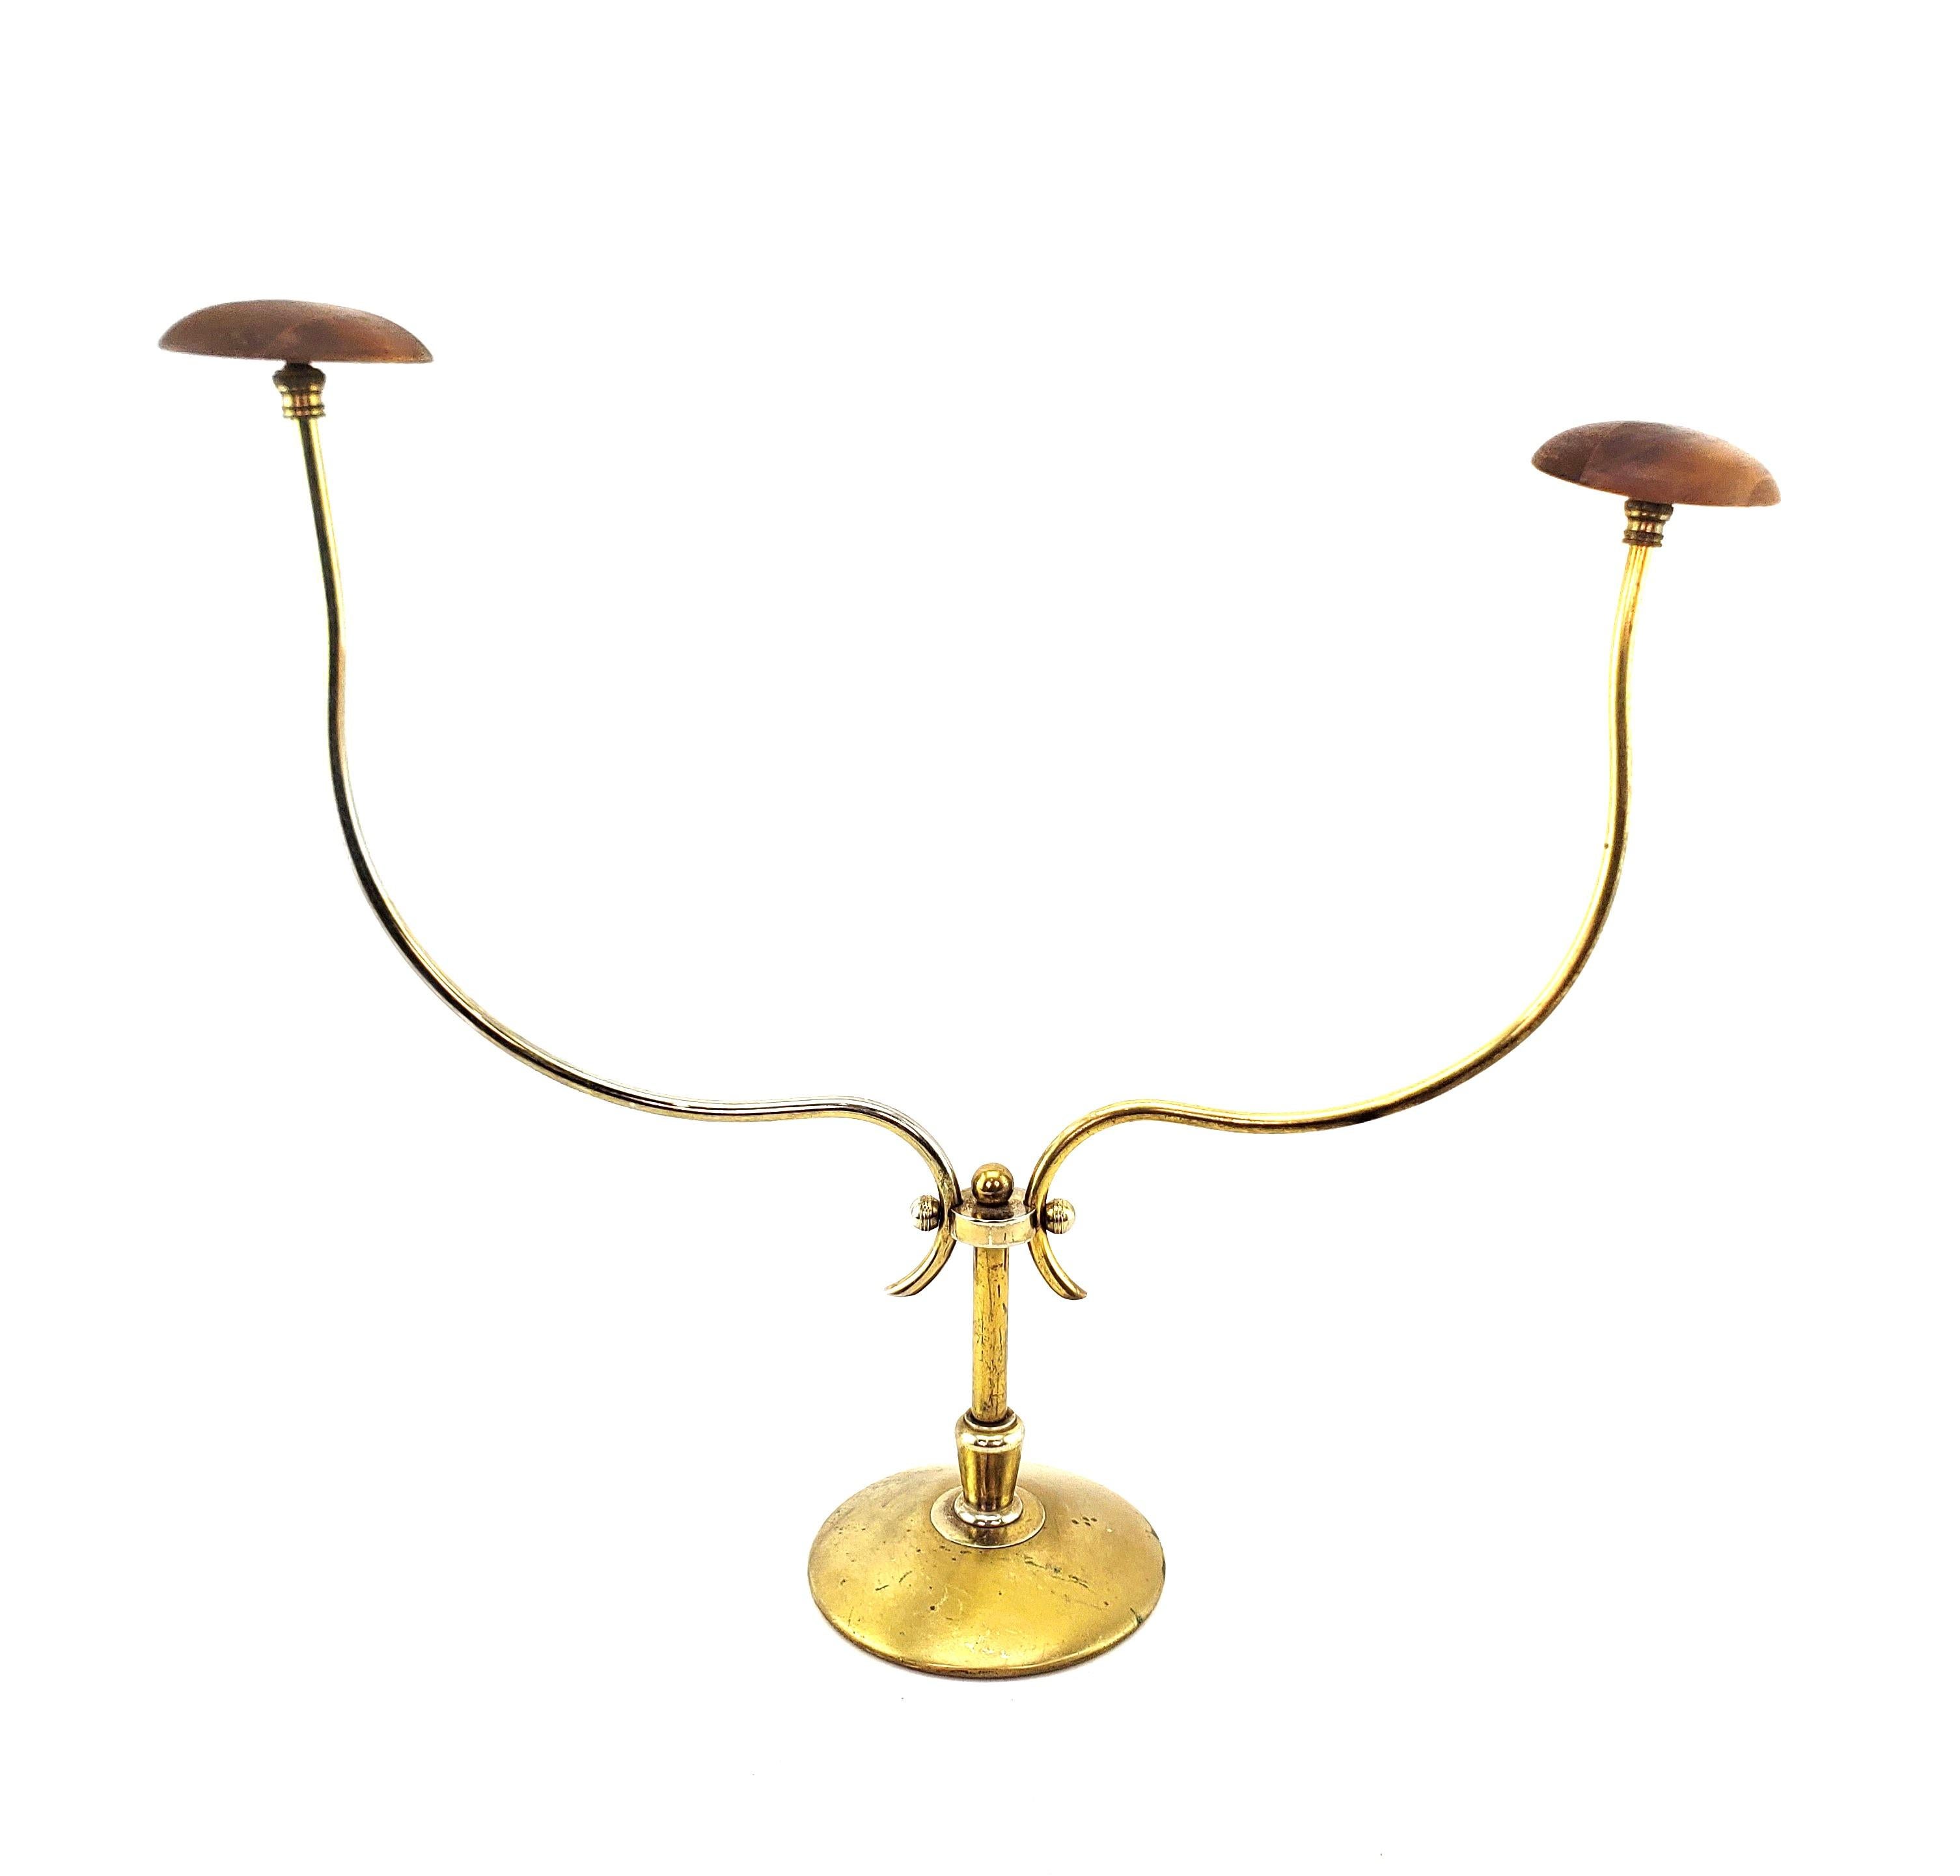 This hat stand is unsigned by the maker, but presumed to have originated from the United States and date to approximately 1960 and done in the period Mid century Modern style. The stand is composed of metal tubing with a gold toned finish with two